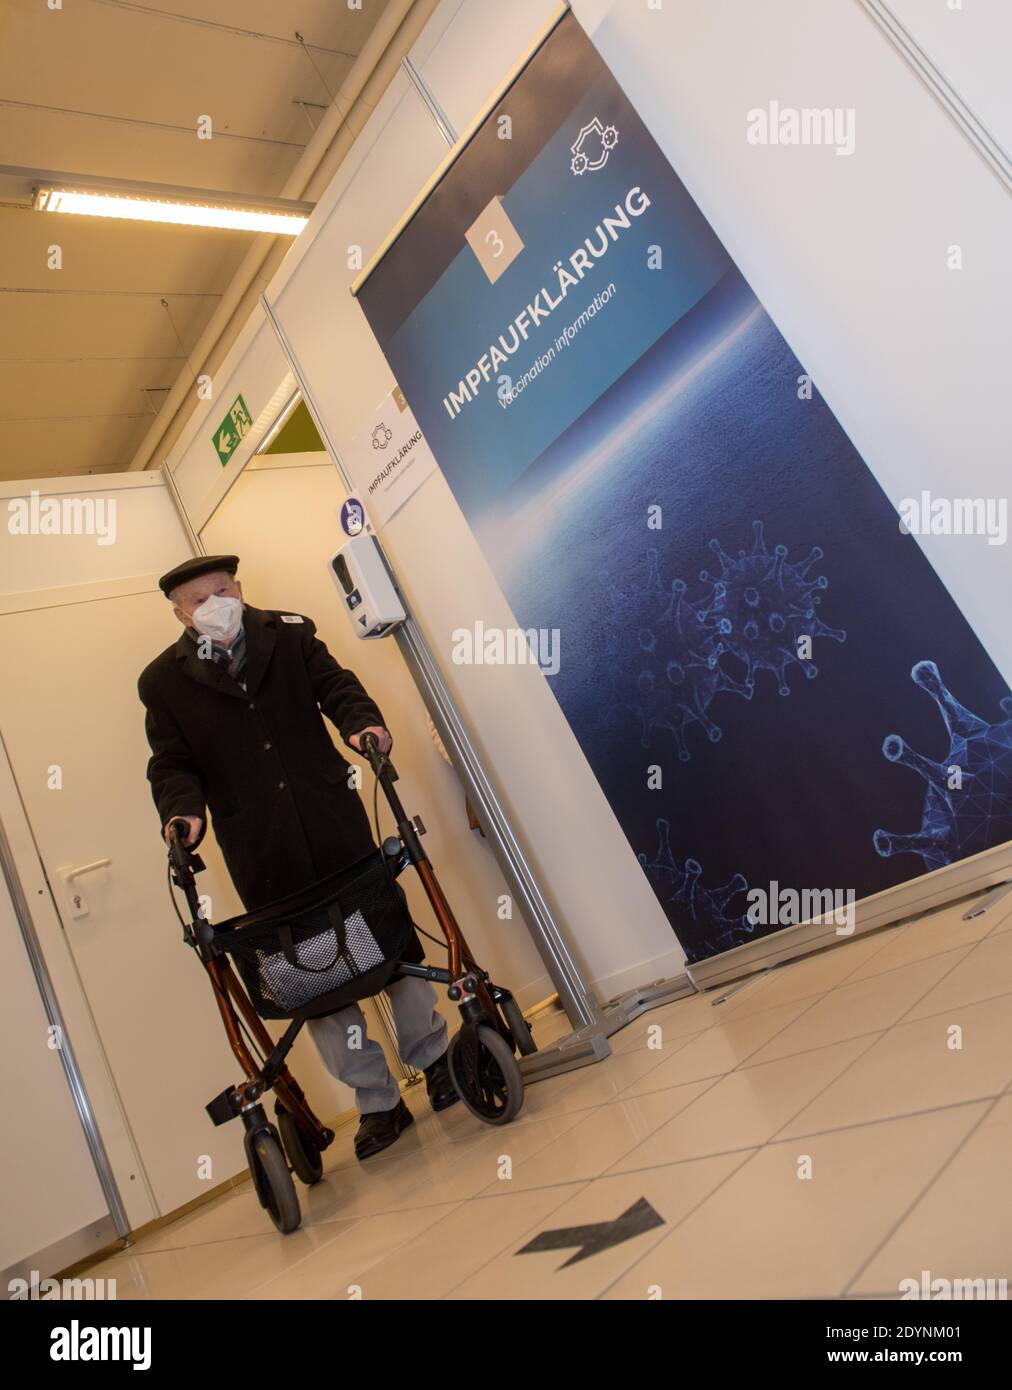 27 December 2020, Bavaria, Weißenhorn: 99-year-old Erwin Knoll walks with a walker to vaccination education at the vaccination center. Corona vaccinations with the Biontech/Pfizer vaccine started in Germany on Sunday. Photo: Stefan Puchner/dpa Stock Photo